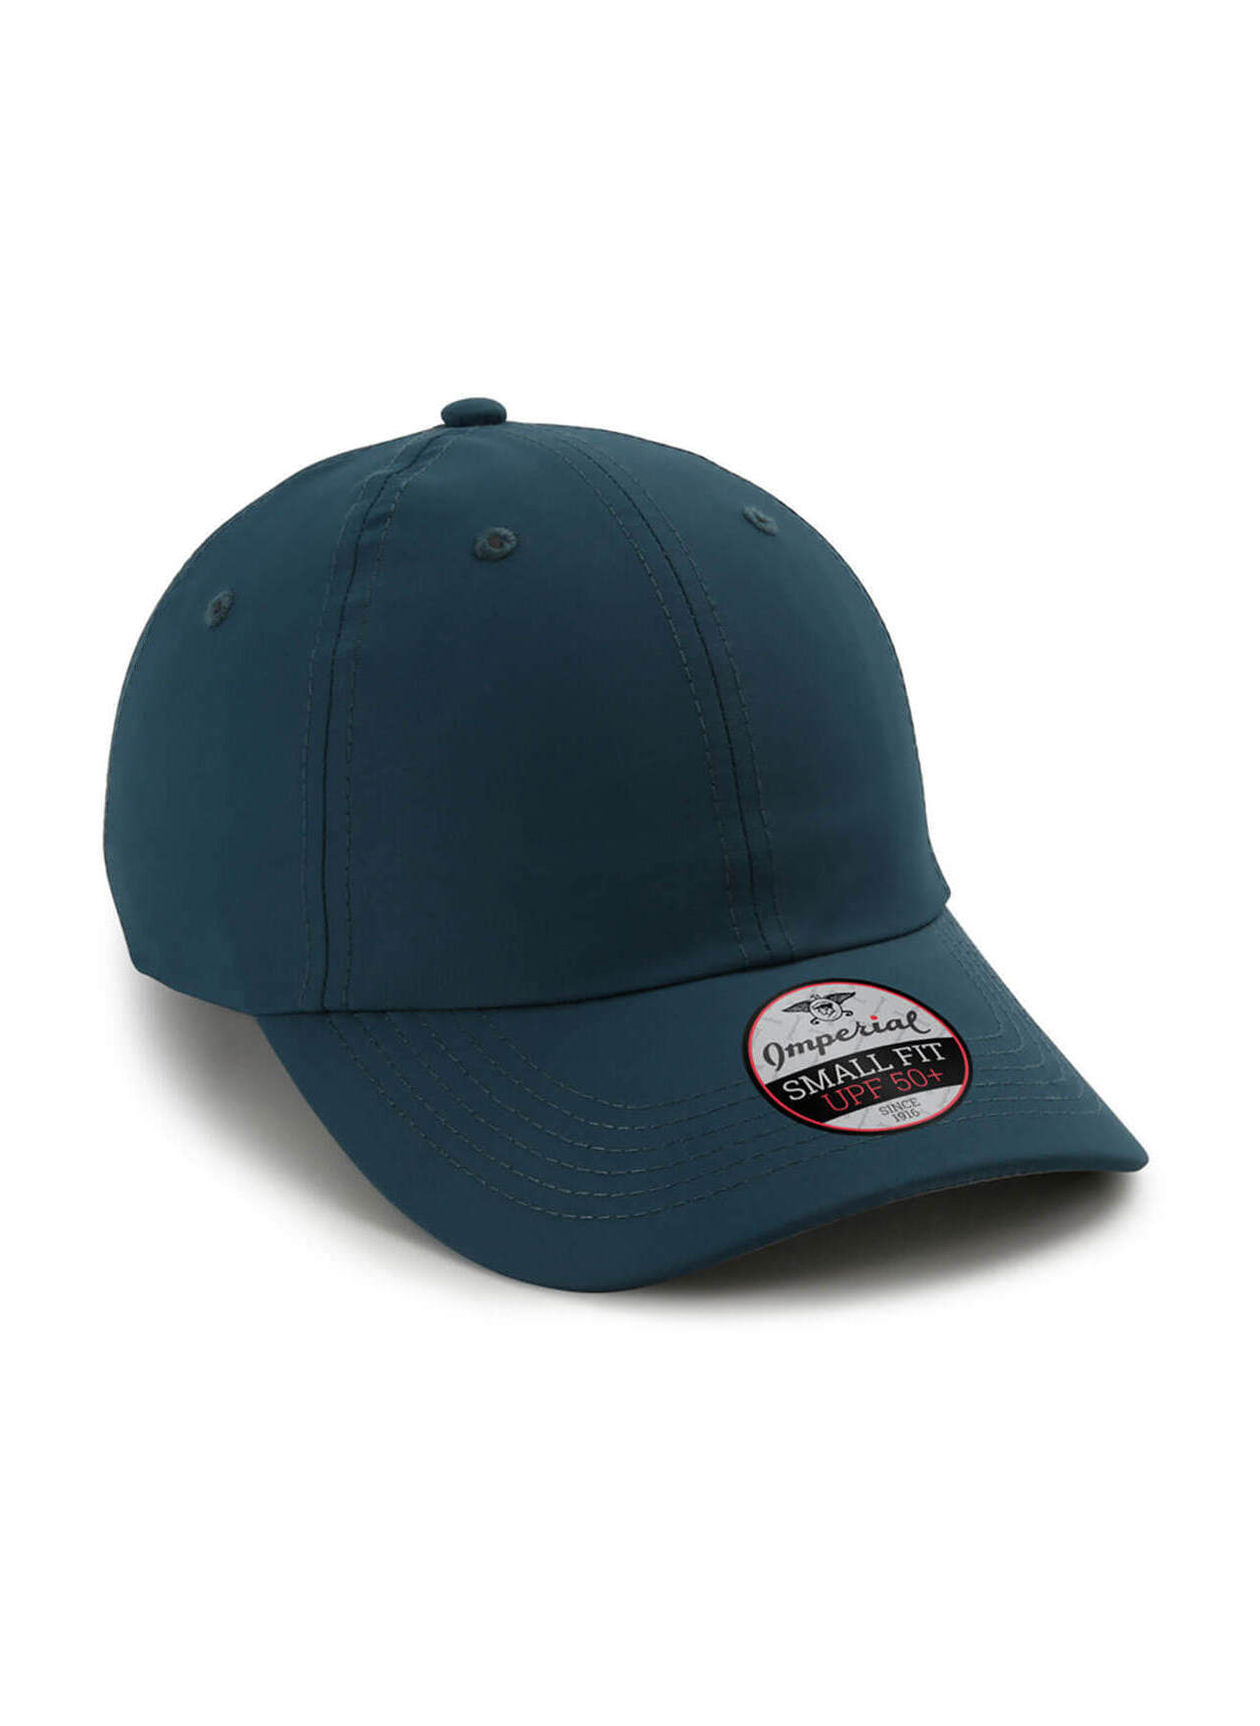 Imperial Petrol Original Small Fit Performance Hat